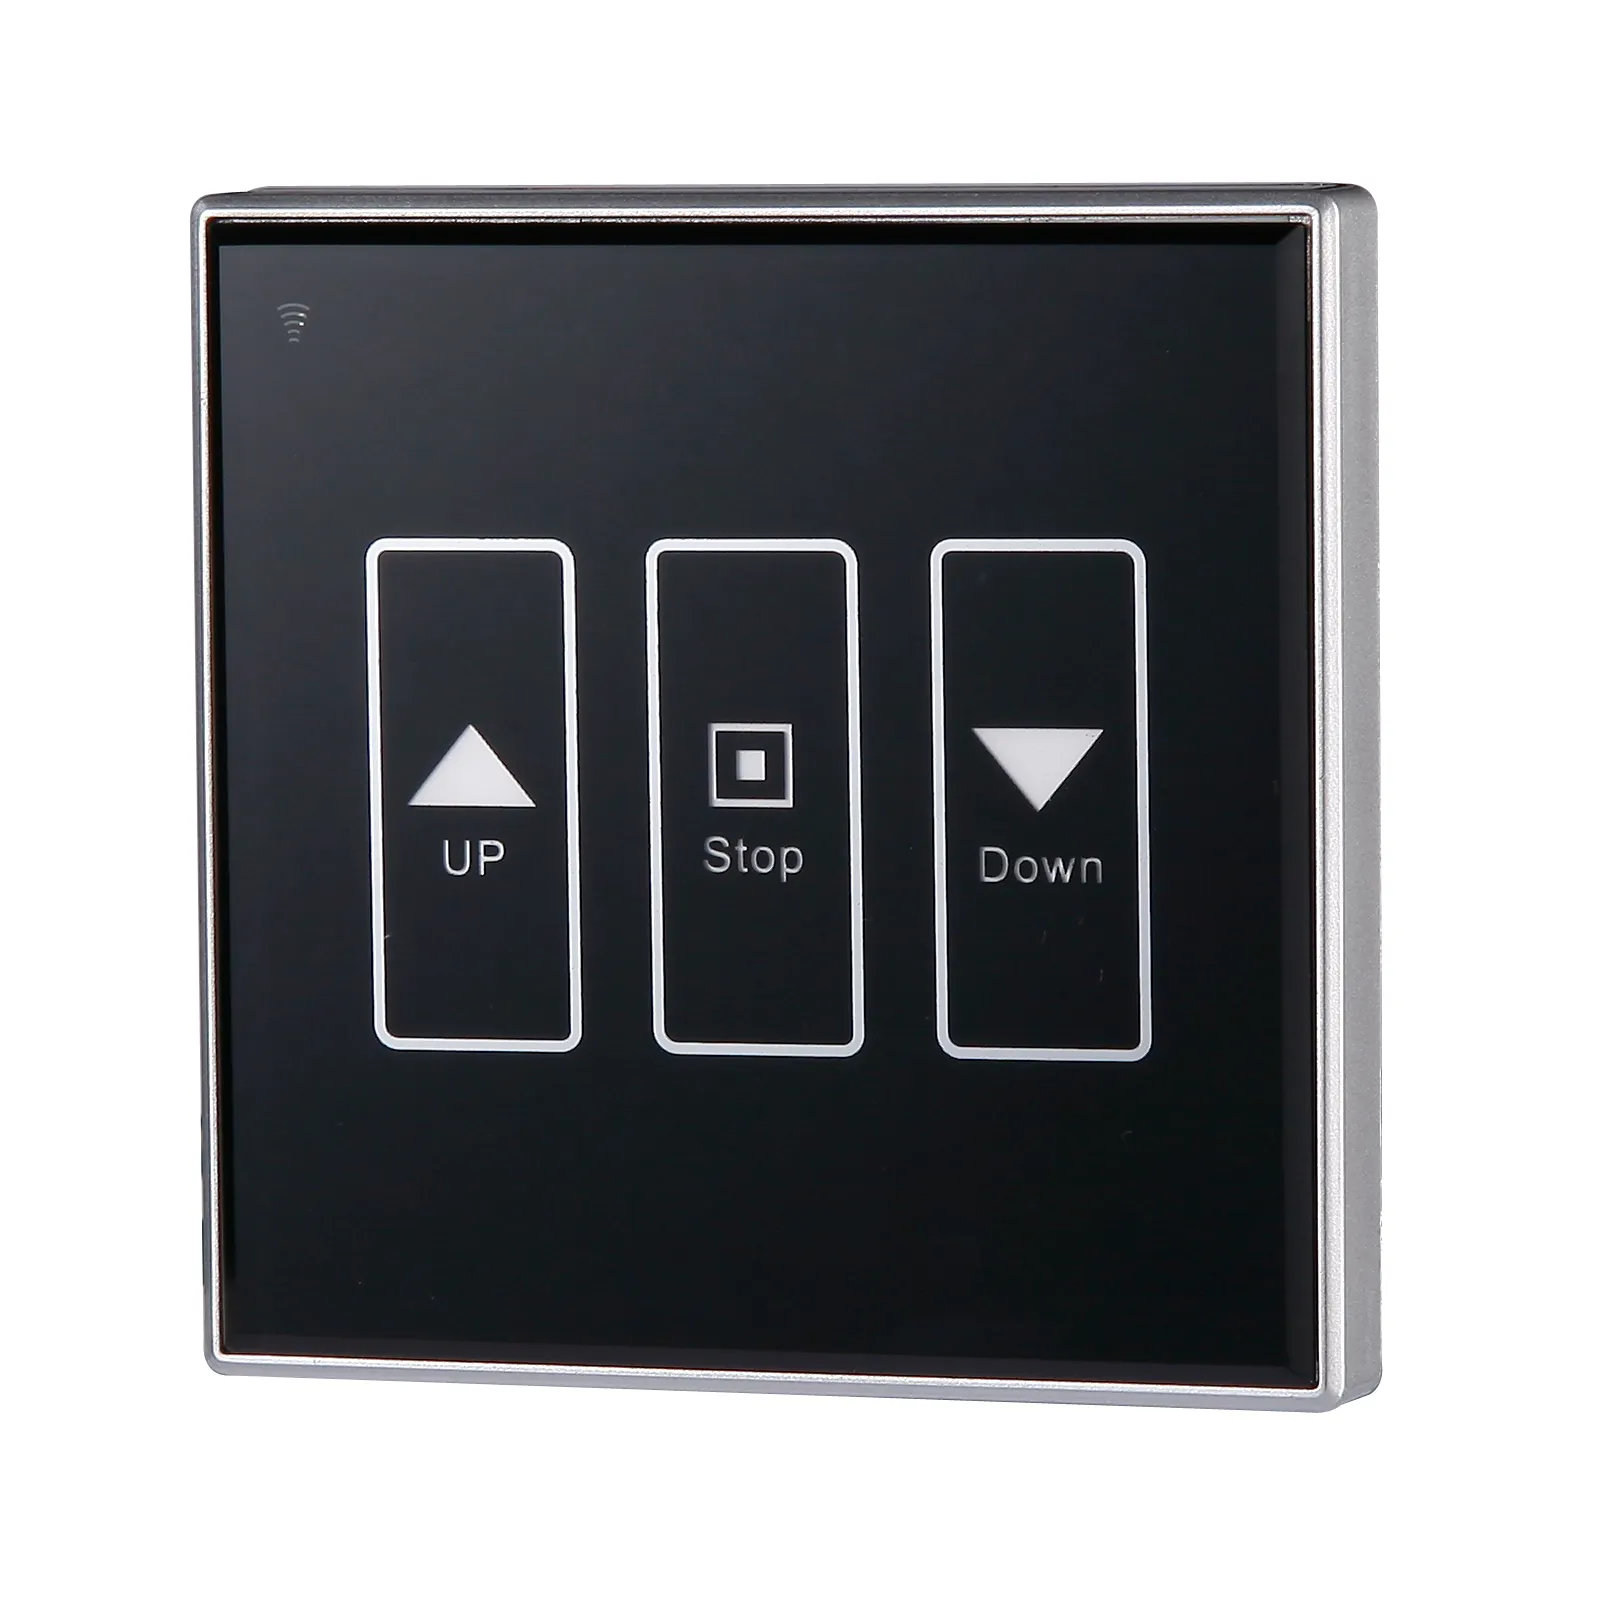 Curtain Switch Glass Touch Press Wall Panel For Electric Motorized Curtain Blind Roller Shutter Smart Home System Automation